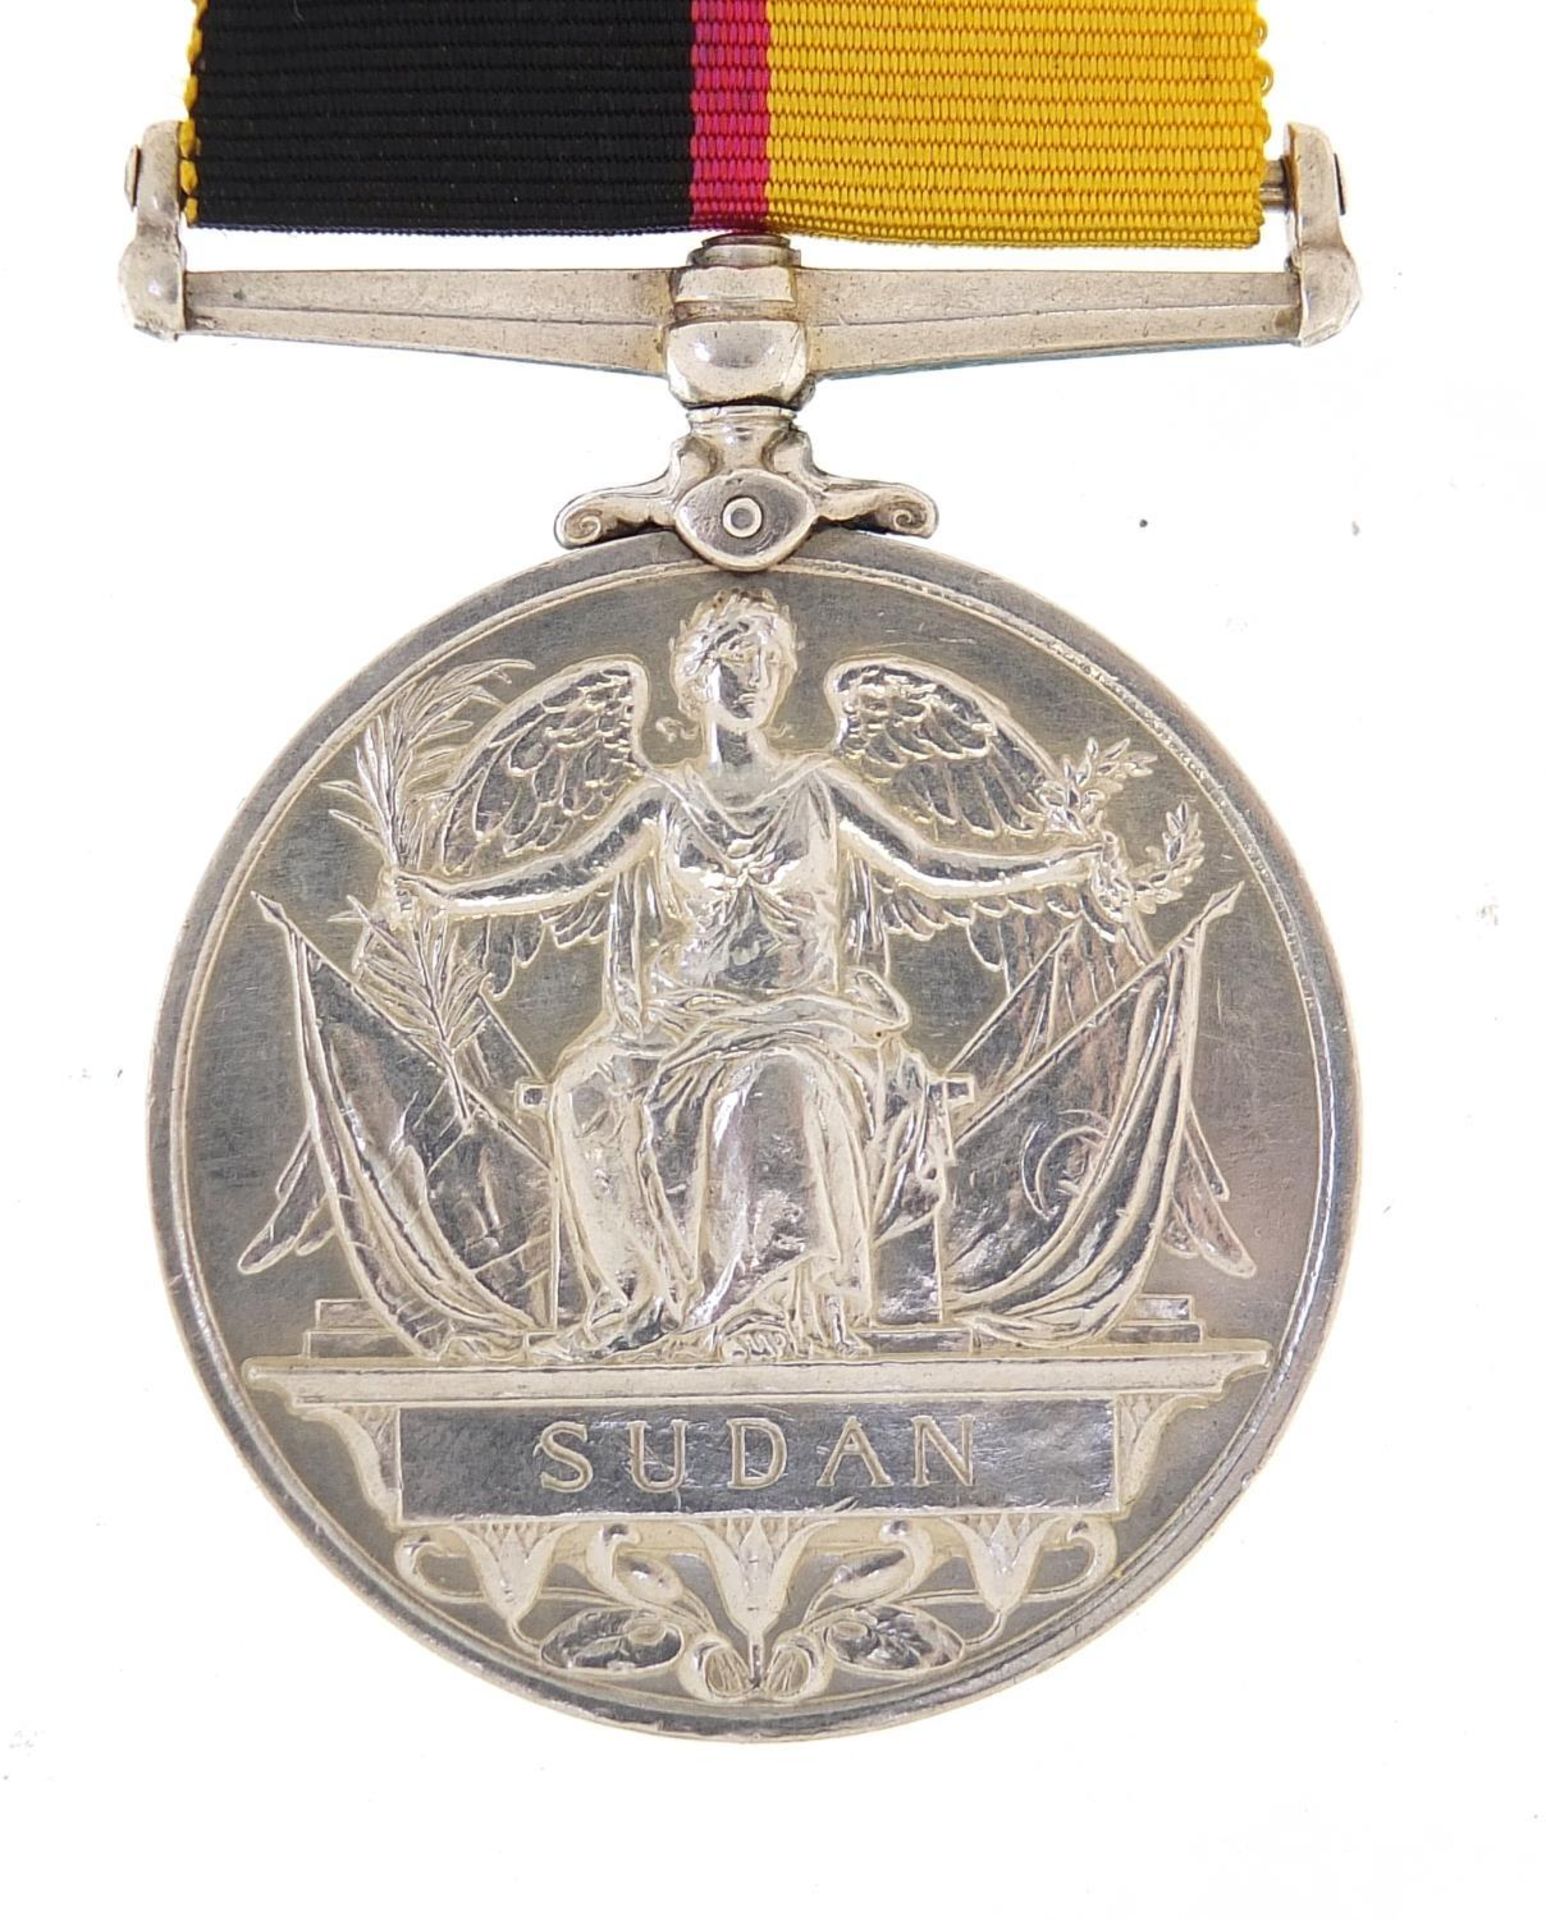 Victorian British military Sudan medal awarded to 3790.PTE.KENNEDY.2/LAN:FUS: